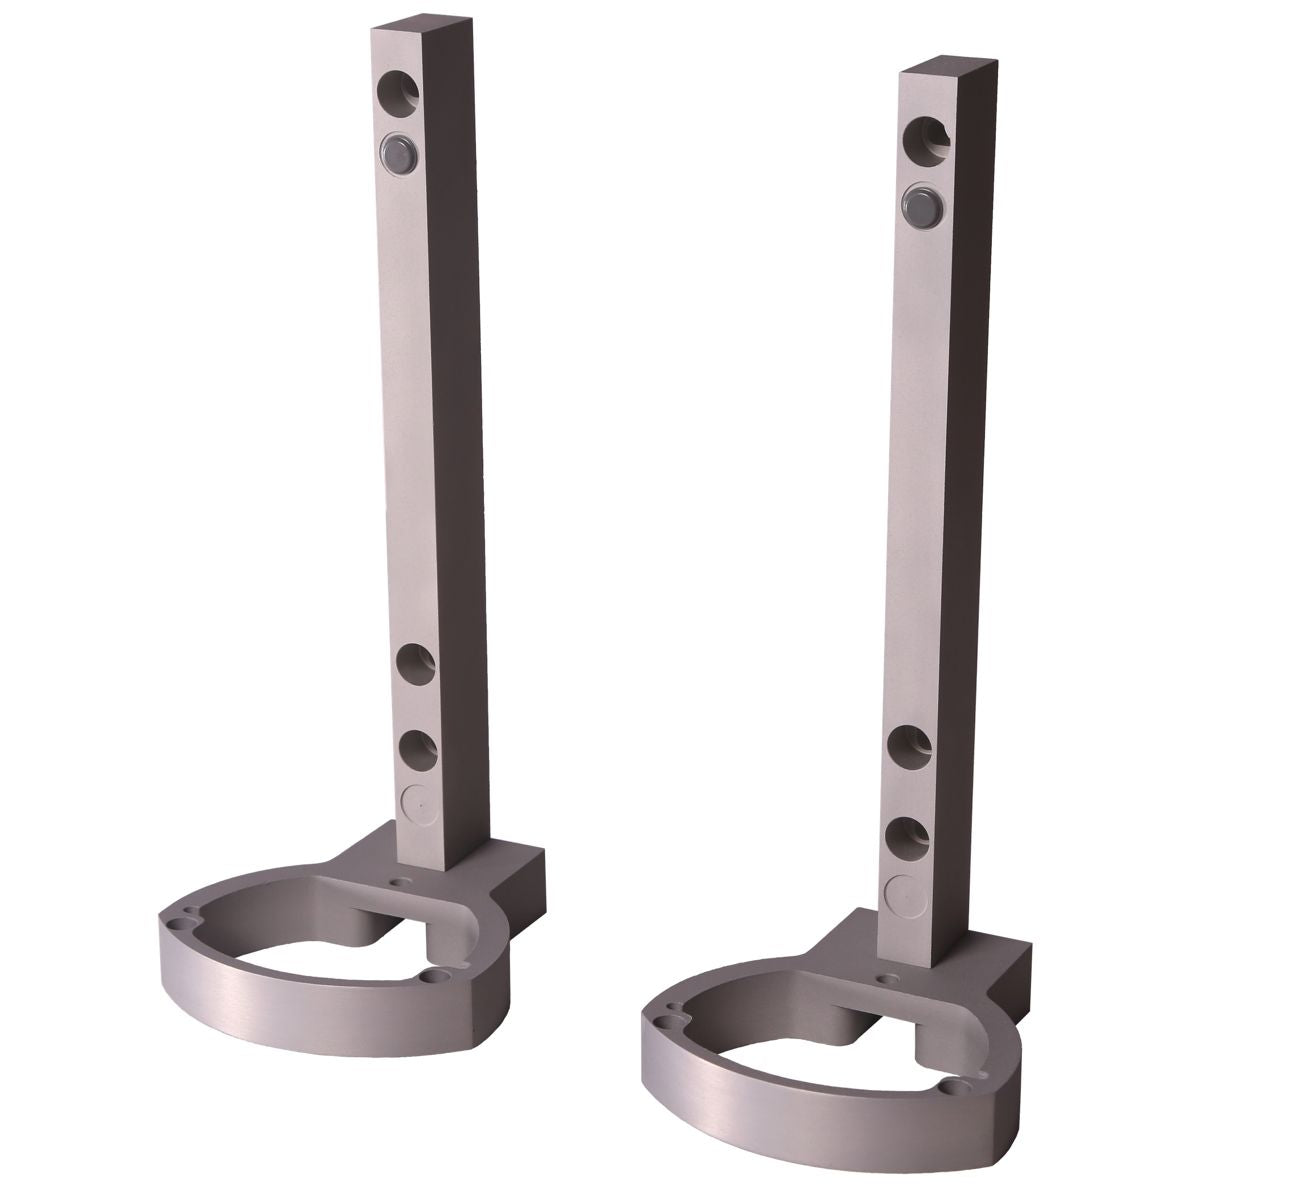 MOUNT MOUNTING BRACKETS BANG AND OLUFSEN B&O BEOLAB 6000 6002 – Audio-Parts.com